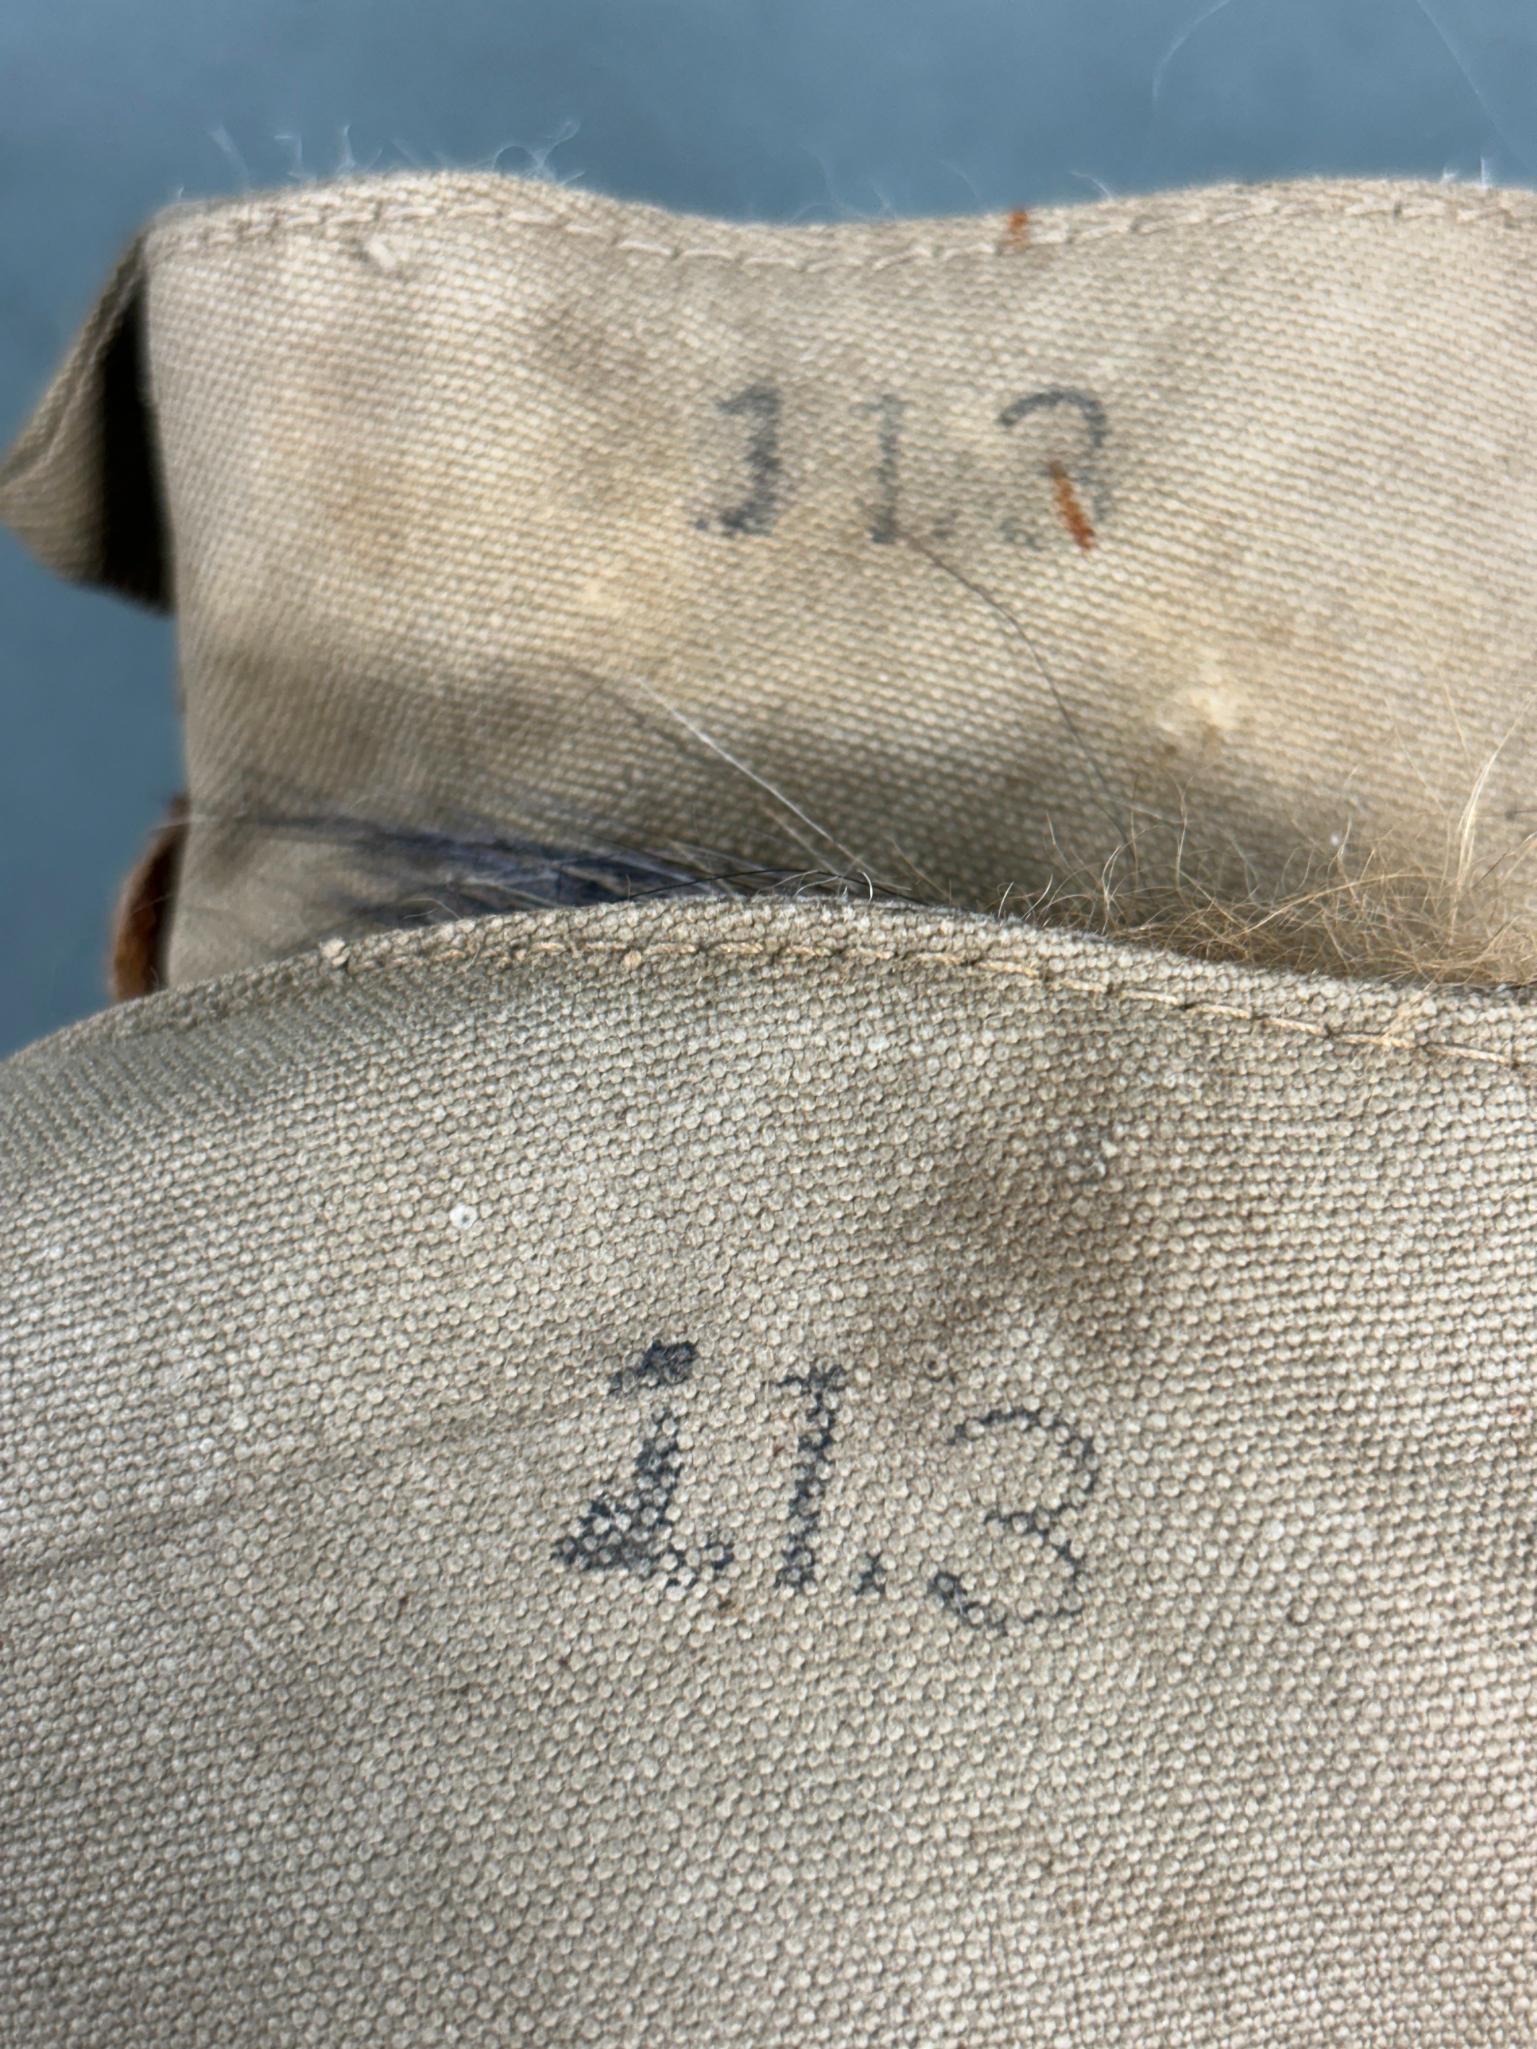 WWII IMP JAPANESE ARMY TYPE 96 COLD WEATHER SHOES